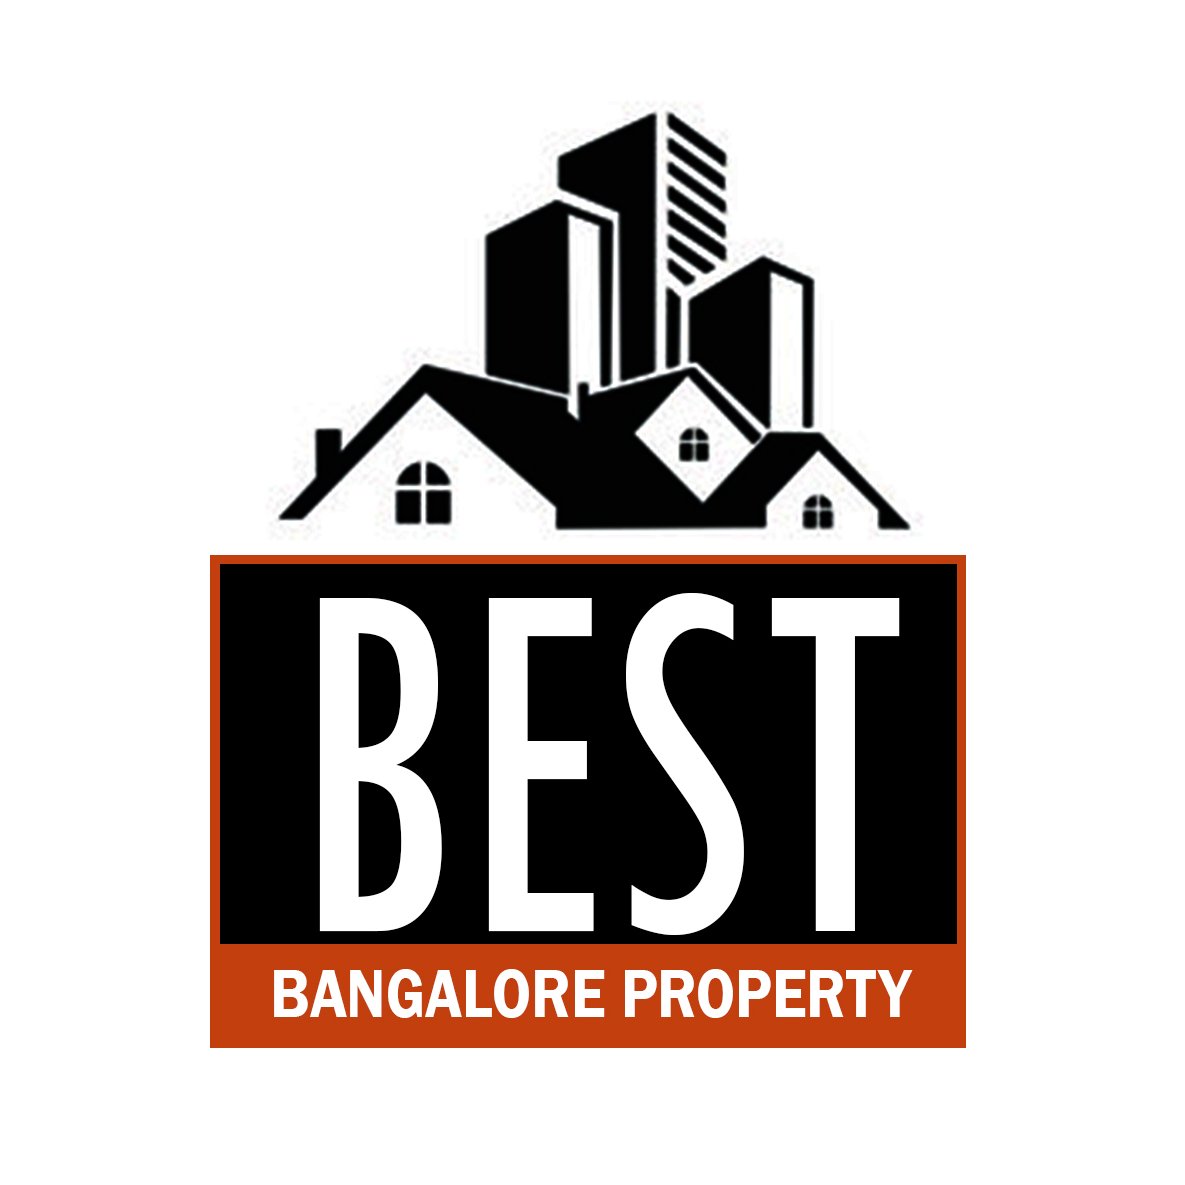 Best Bangalore Property is an Online Real Estate Consulting Firm - https://t.co/eOXbHWiu1c